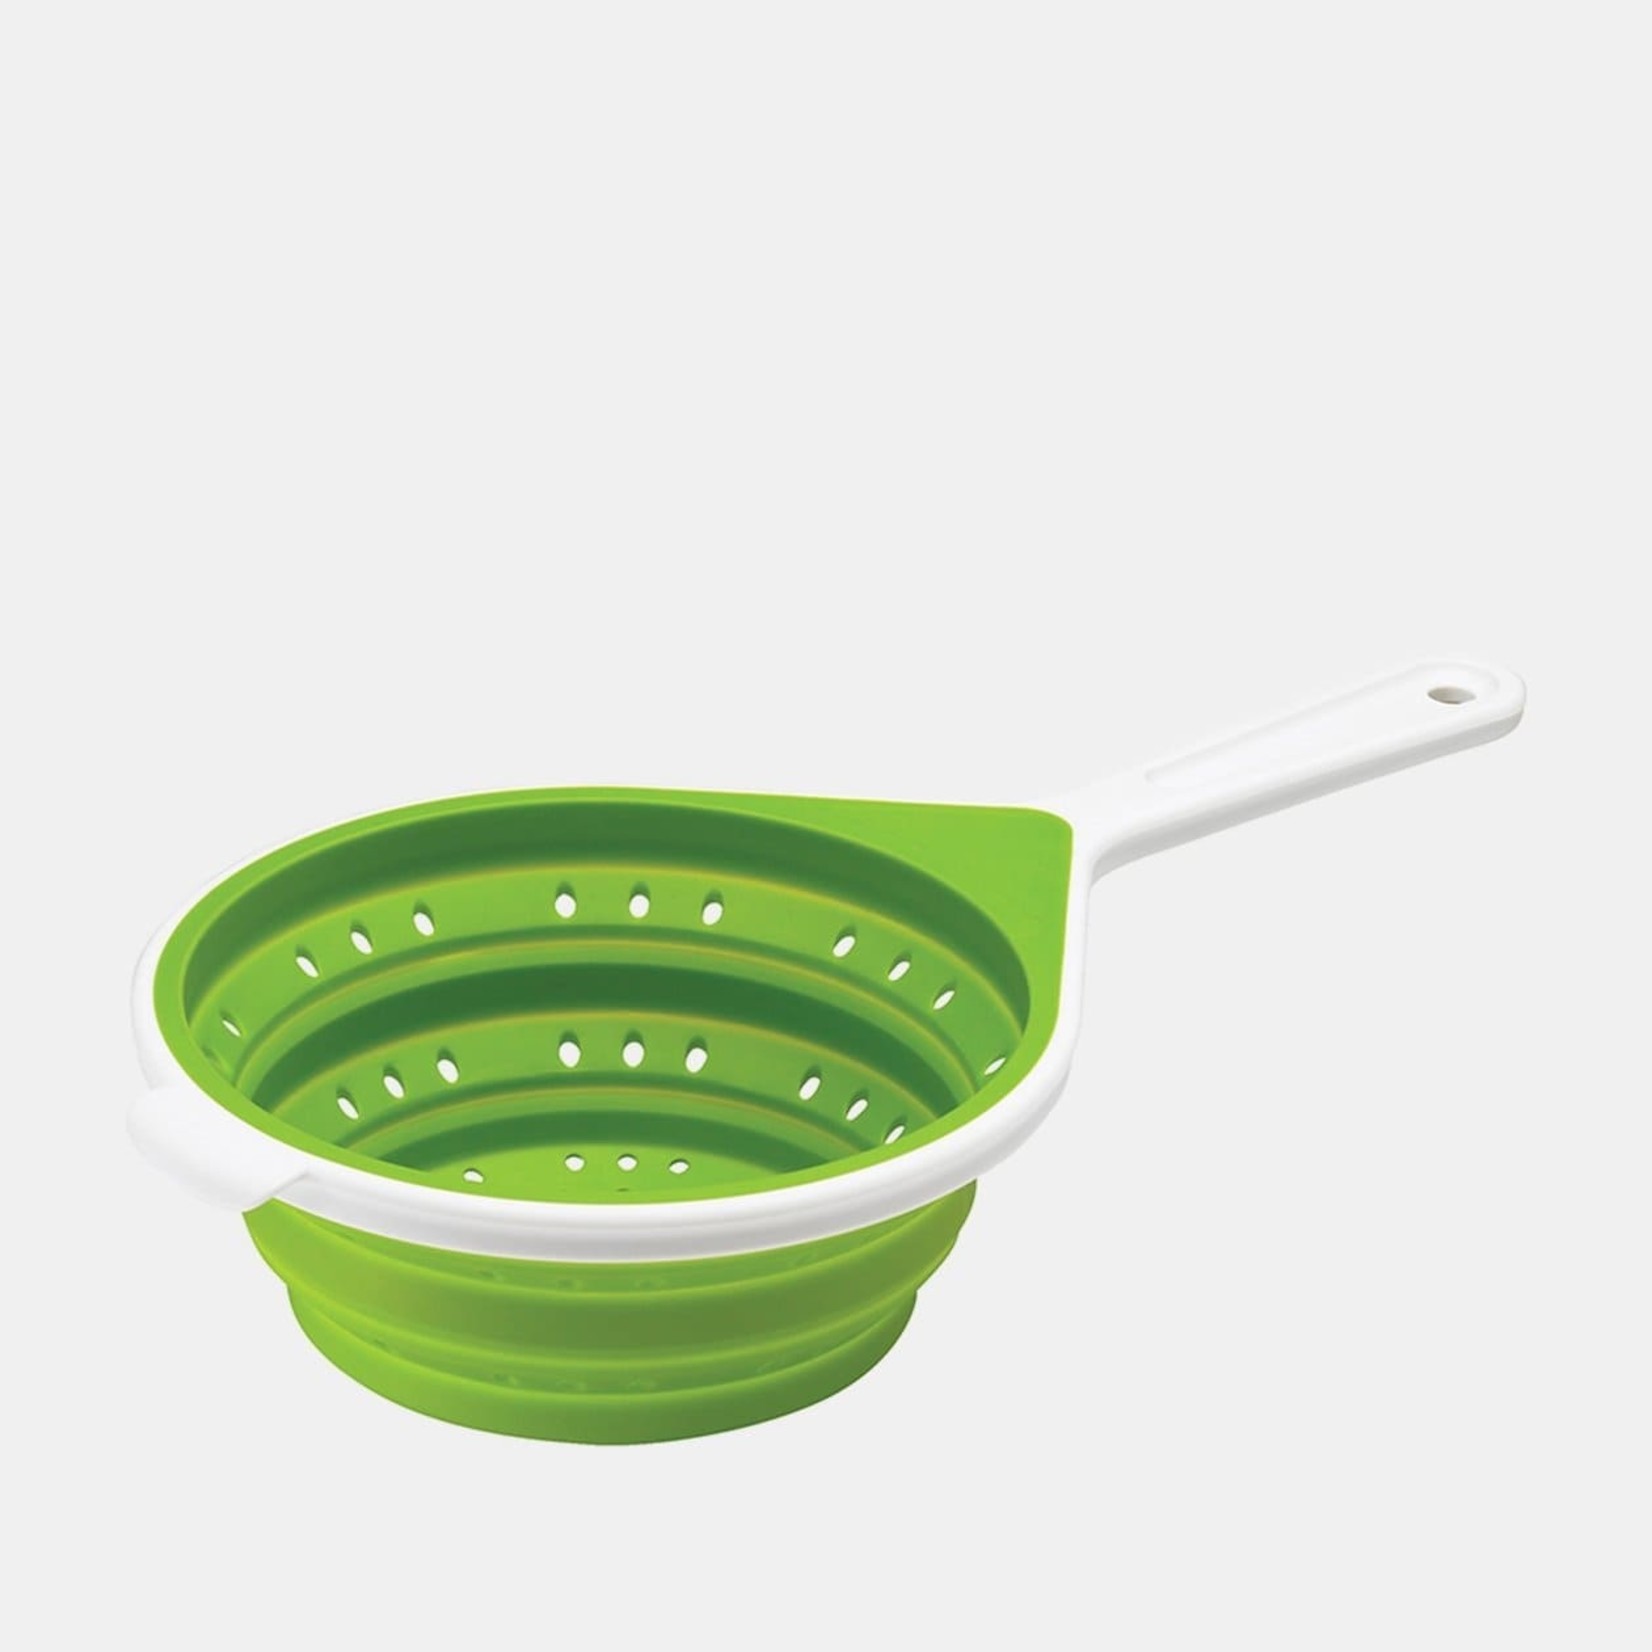 CHEF'N CHEF'N Collapsible Colander Green